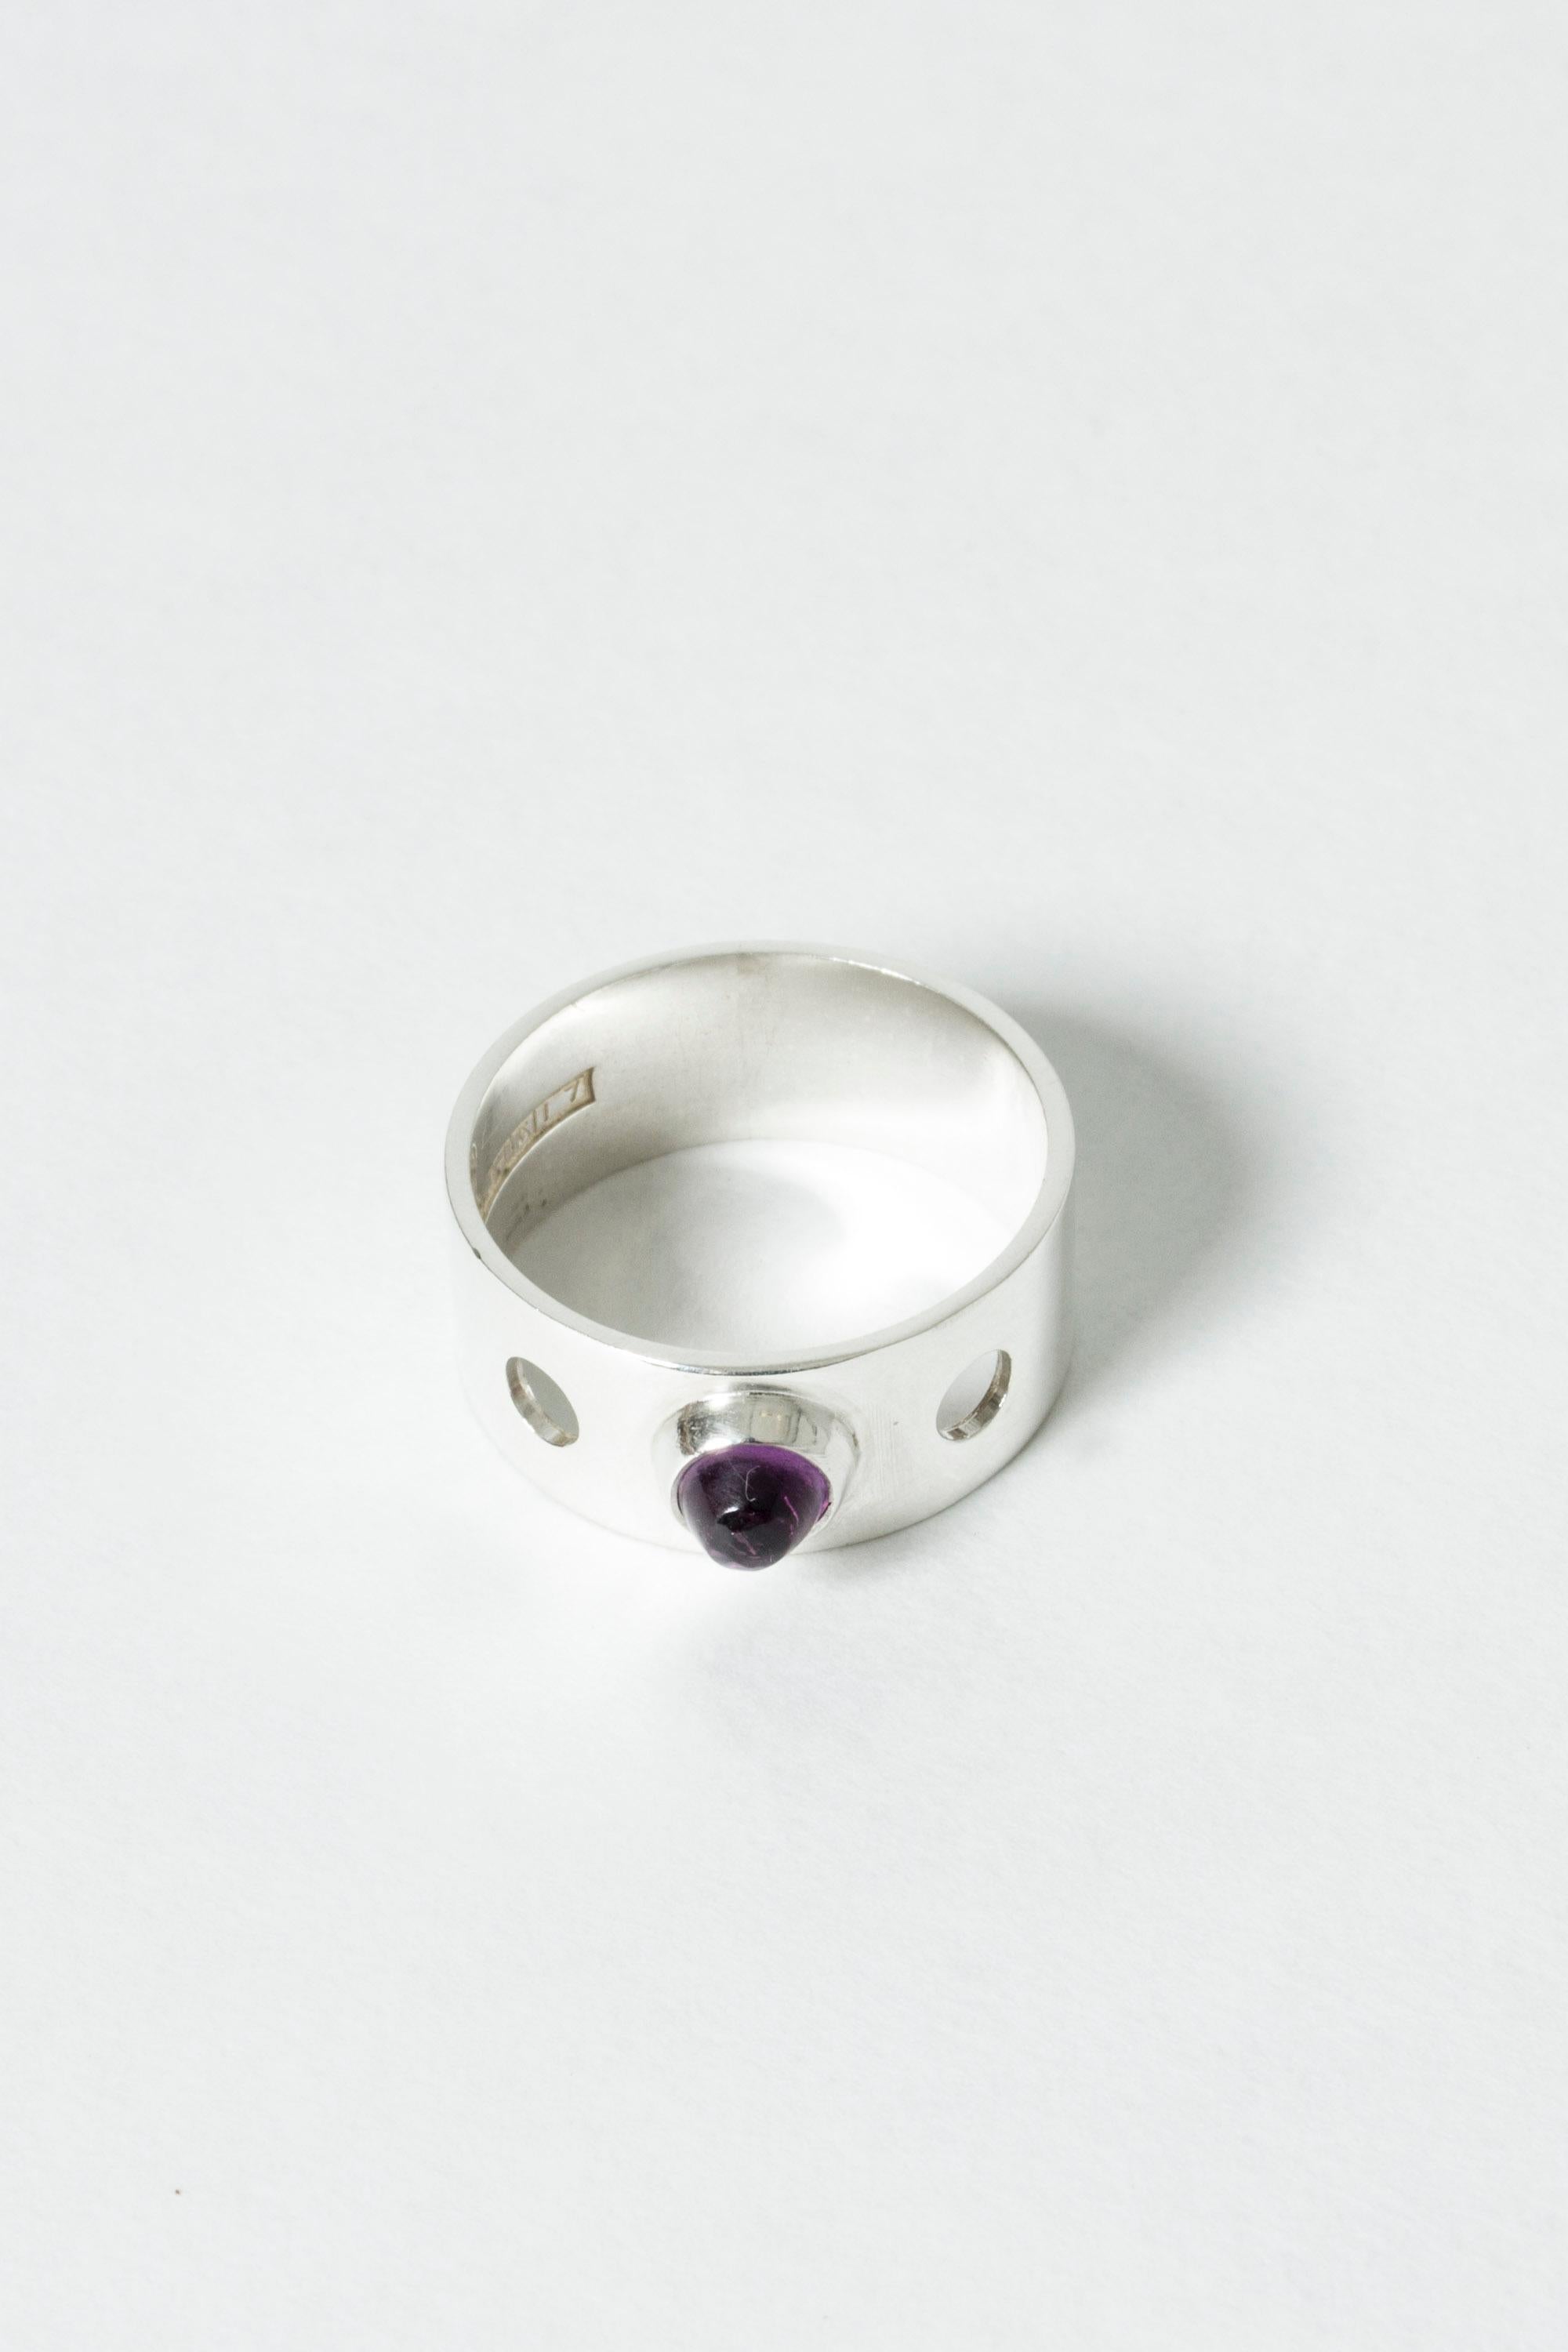 Cool silver ring by Elis Kauppi, with a pointy amethyst stone in the middle, two perforated holes on each side of it. Edgy in a subtle way, a perfect minimalist ring that doesn’t go unnoticed.